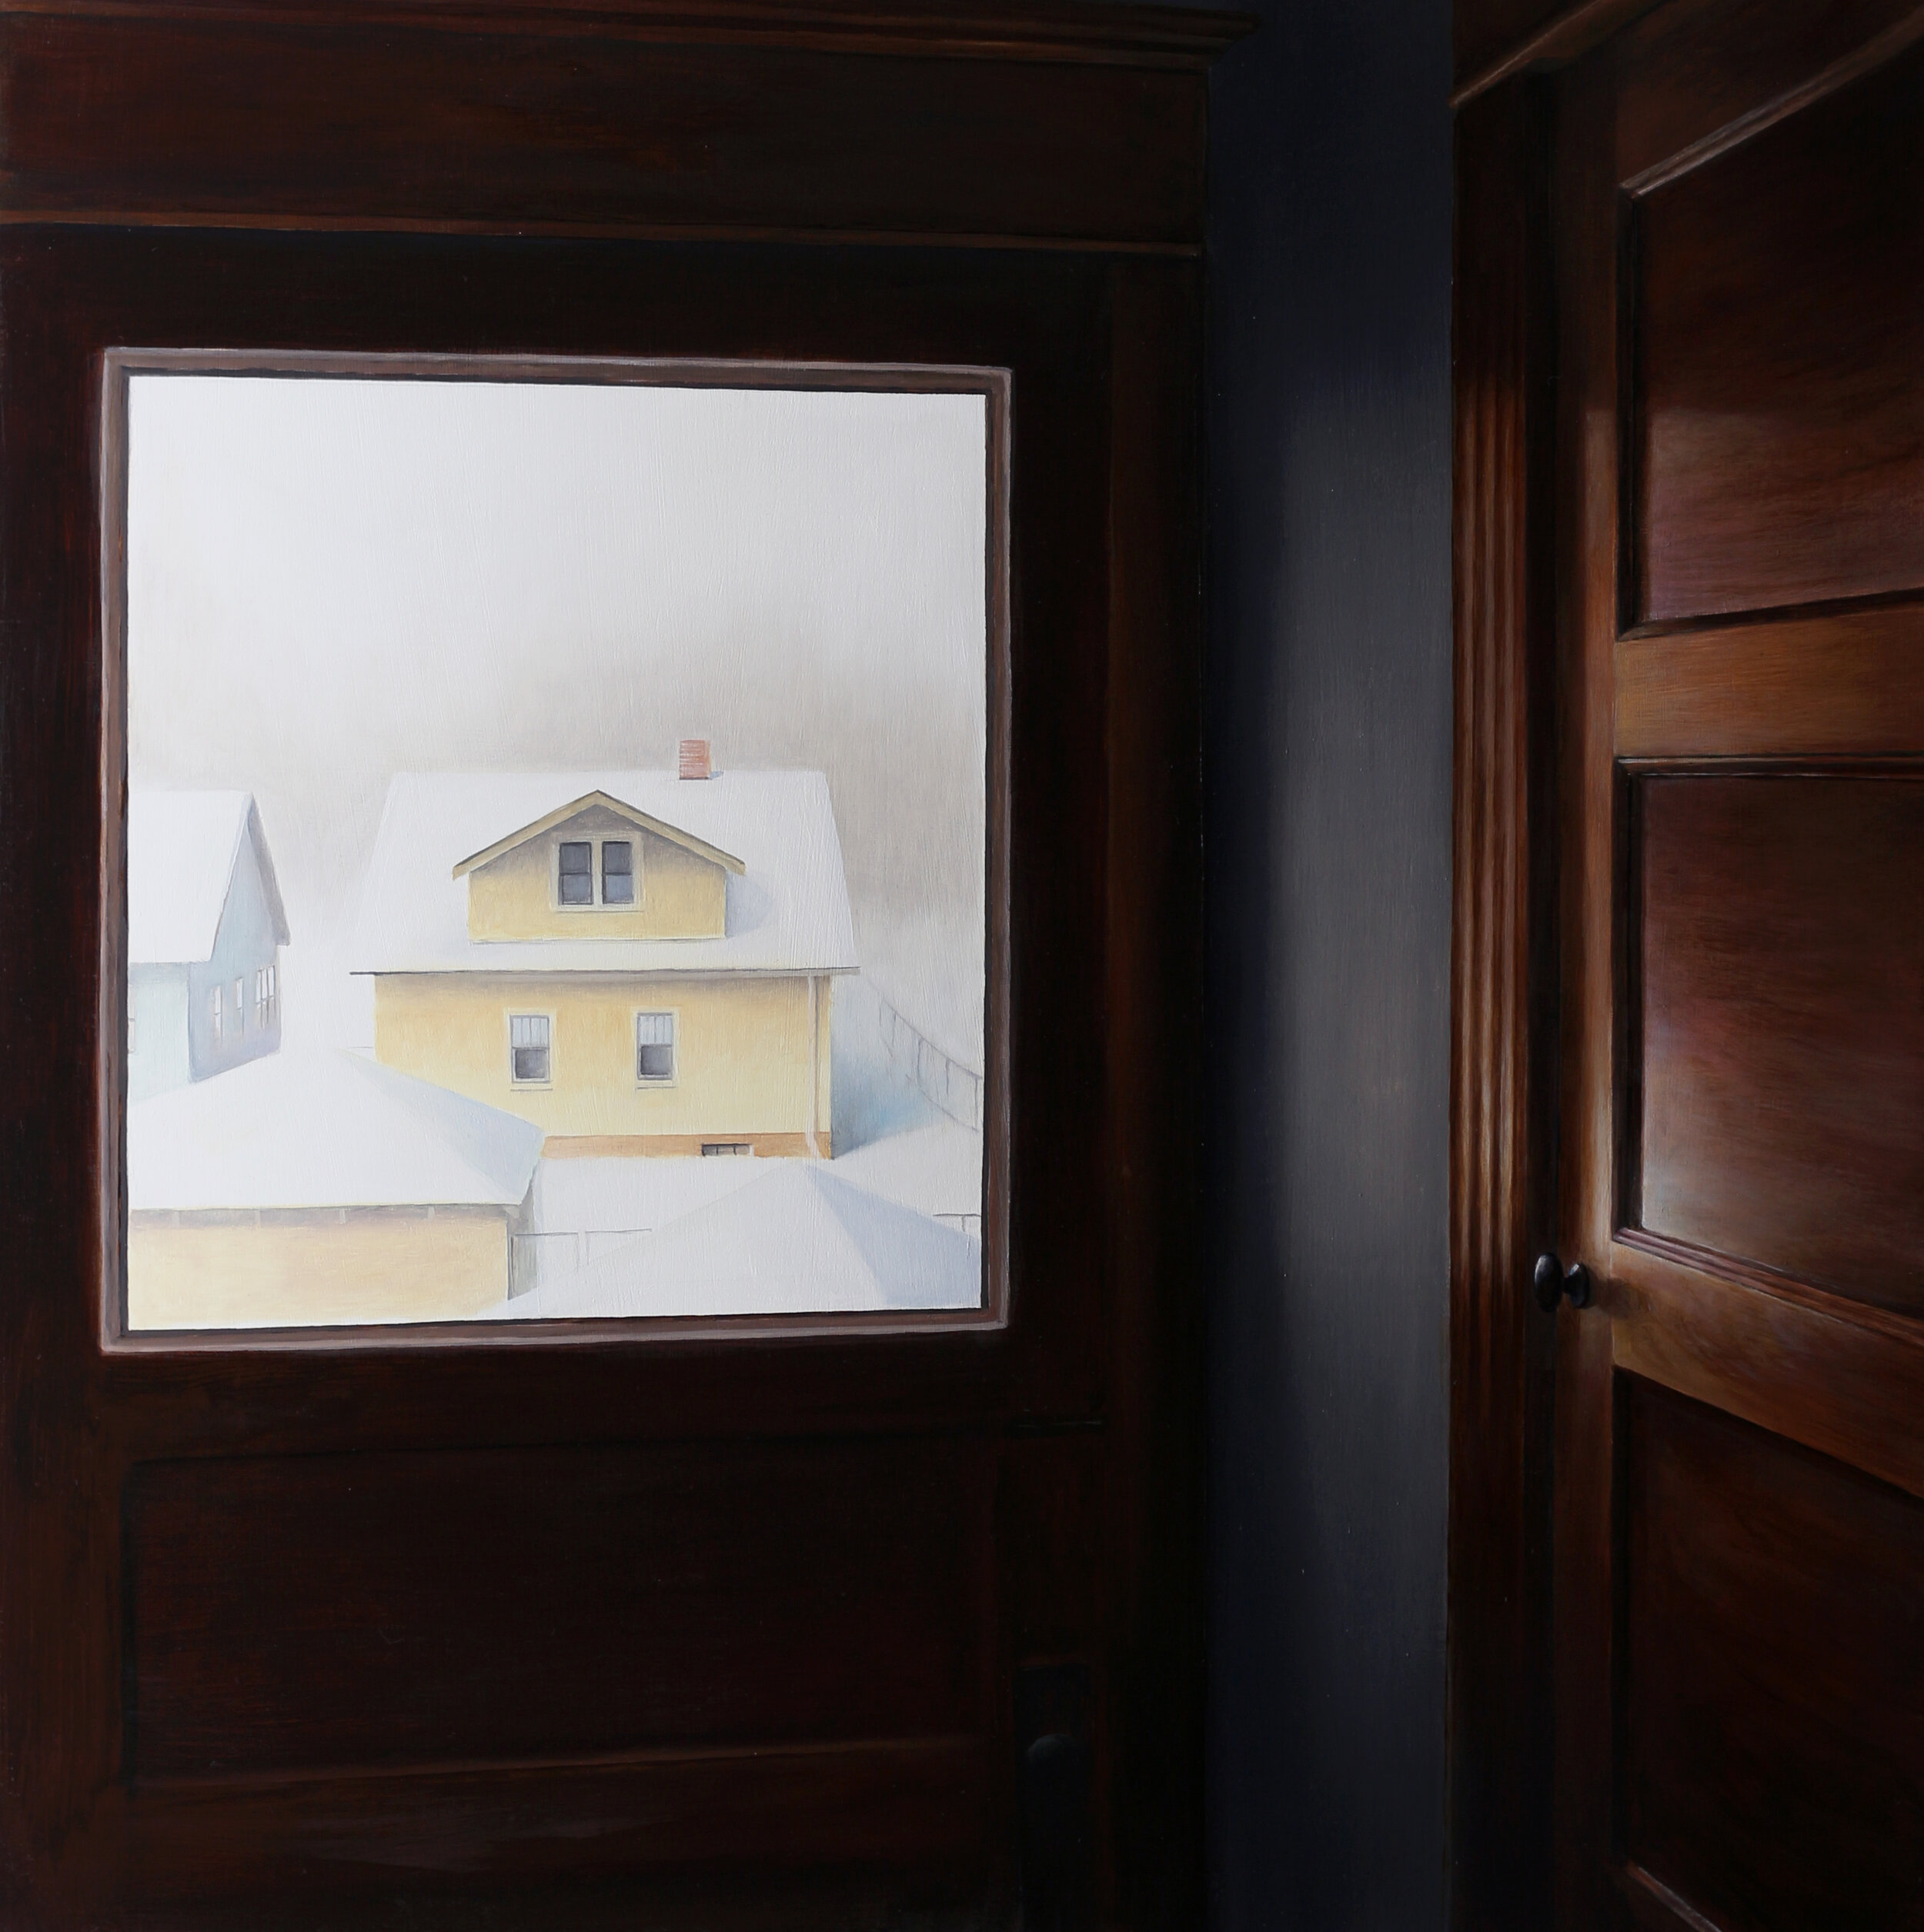   Winter View   2020  Oil on panel  20 x 20 inches       